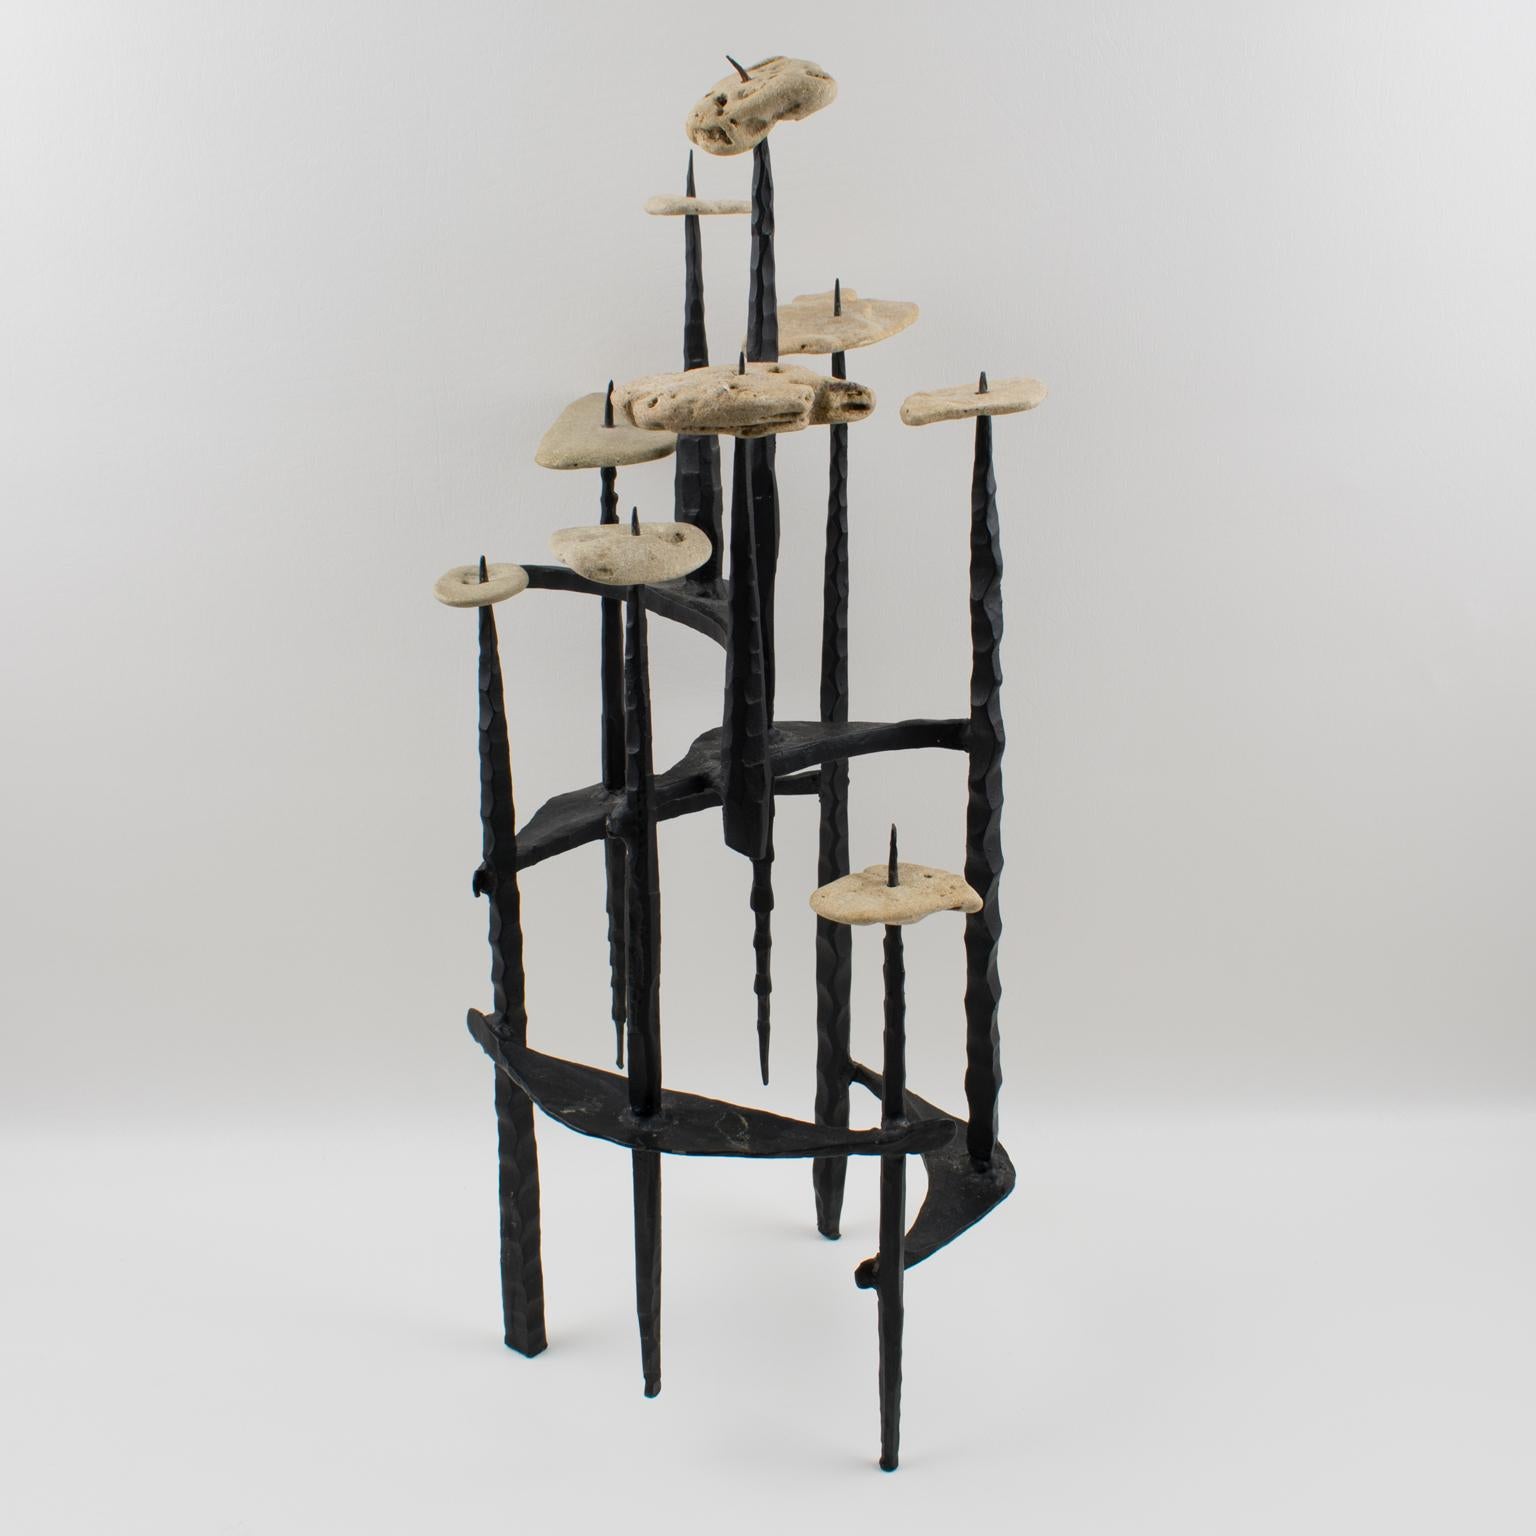 Sculptural menorah or candelabra or Chanukiah by Israeli sculptor David Palombo (1920-1966). Made with welded hammered iron and rocks, it has a very impressive presence. This Brutalist composition features heavy textured hand forged wrought iron